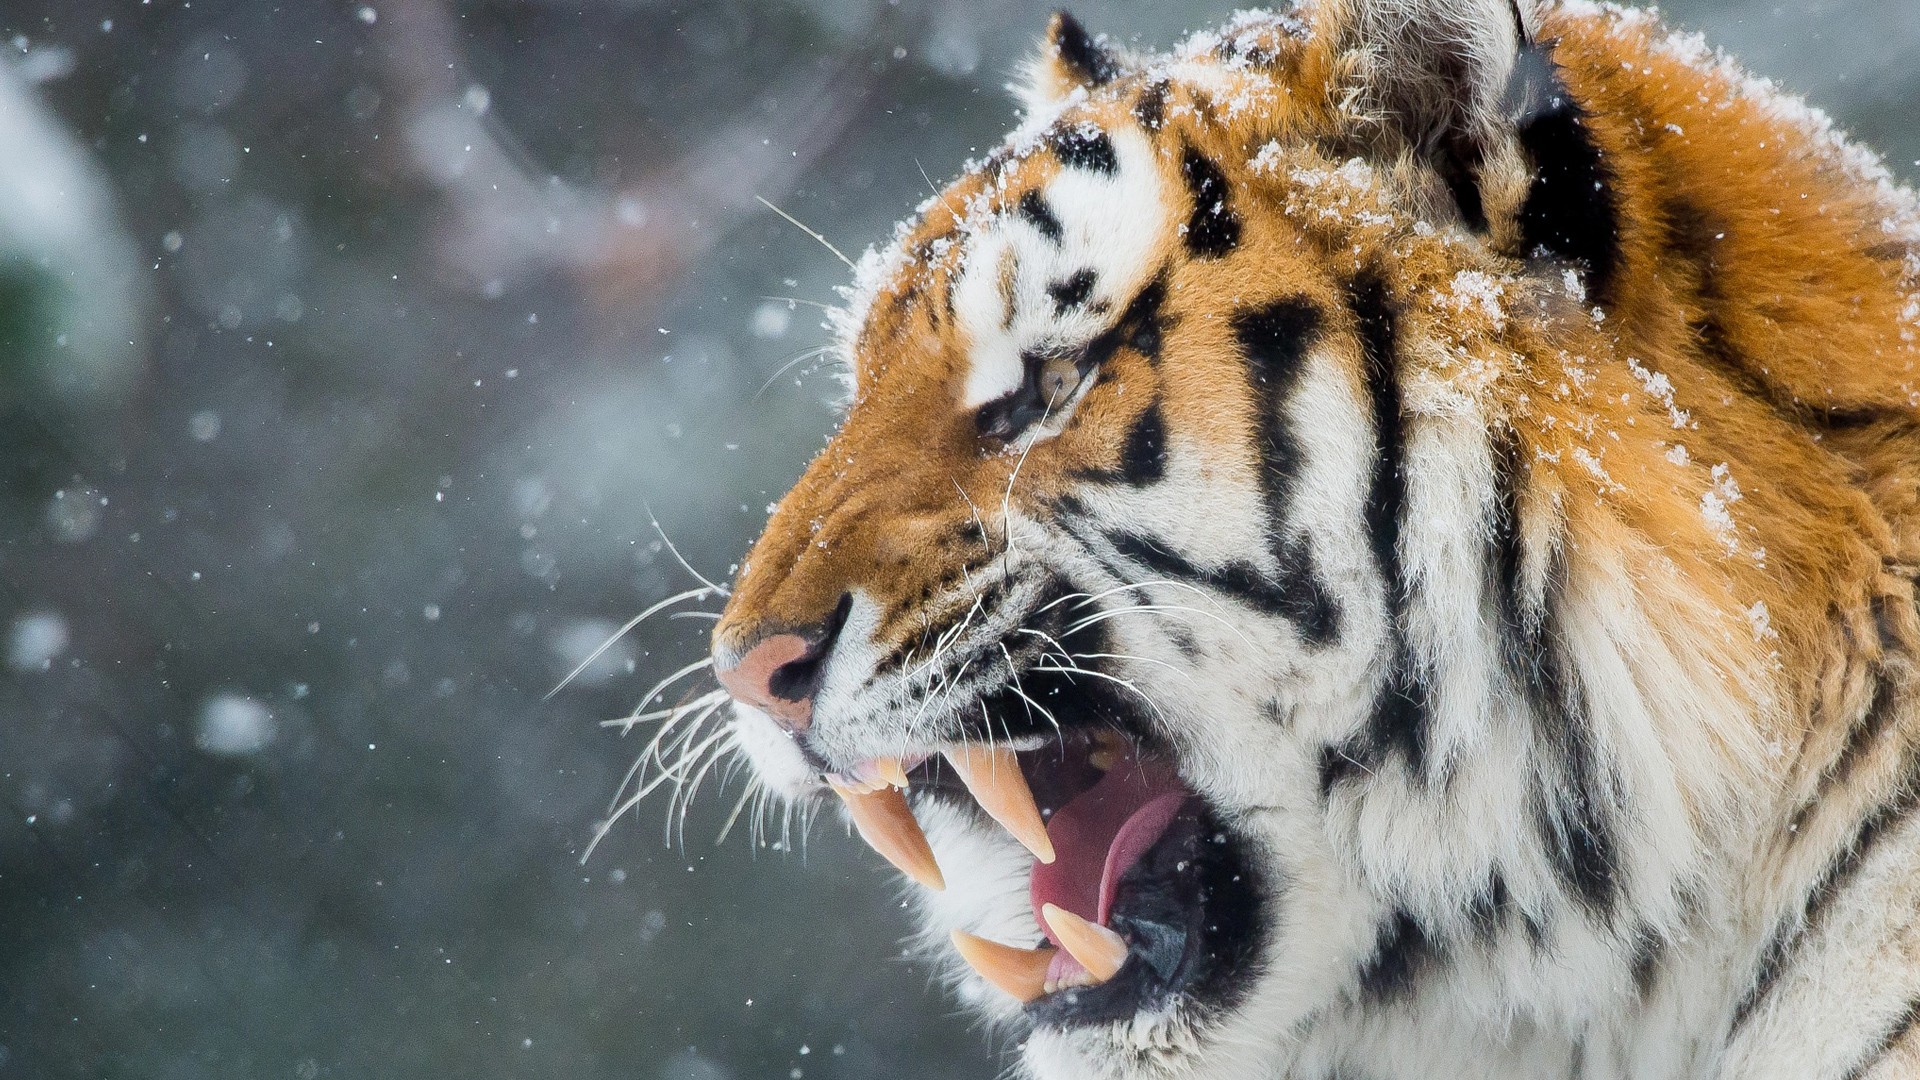 Animals Hd Wallpapers Wild Hungry Tiger - Did Not Wake Up Today - 1920x1080  Wallpaper 